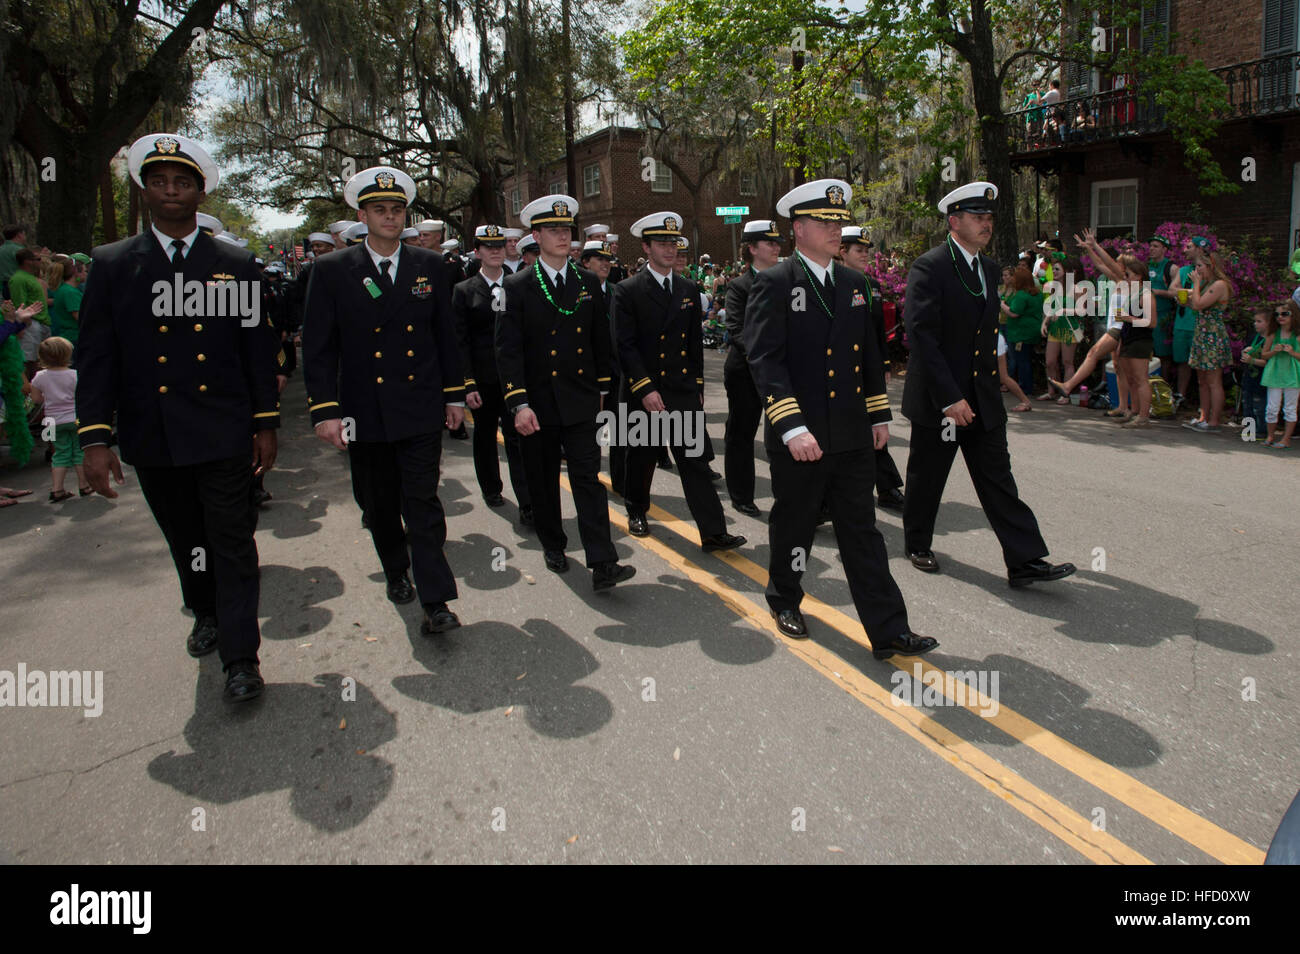 The crew of the amphibious dock landing ship USS Whidbey Island (LSD 41) march in the Savannah St. Patrick's Day Parade. Whidbey Island is in Savannah for a routine port visit from their homeport at Naval Amphibious Base Little Creek, Va. Sailors participate in Savannah's St. Patrick's Day parade 120317-N-FG395-068 Stock Photo